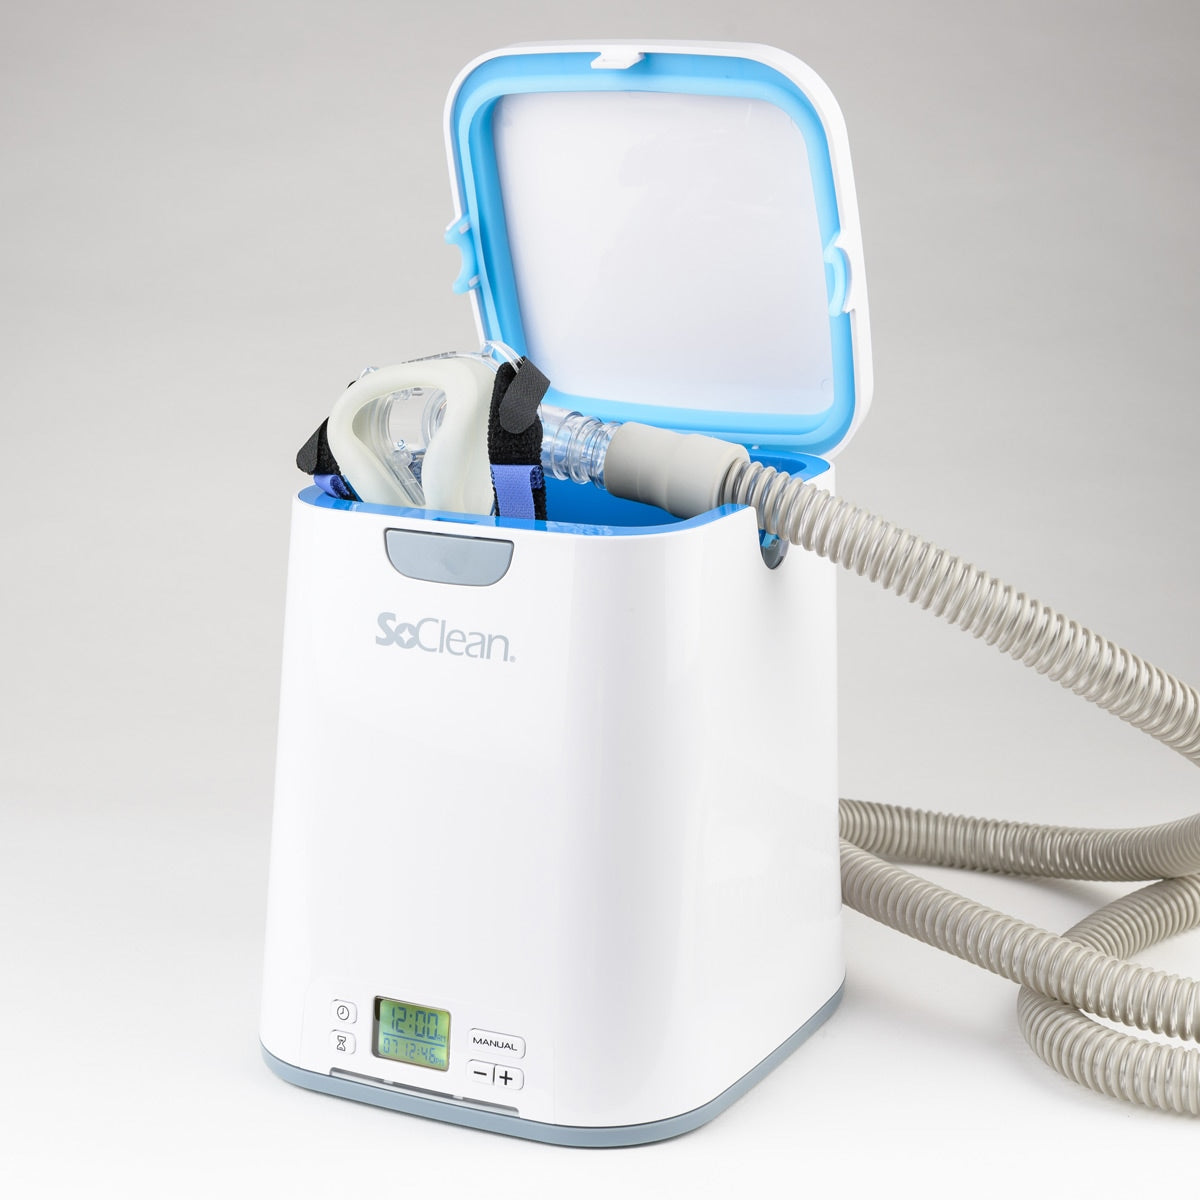 SoClean 2 CPAP/BiPAP Cleaner & Sanitizer (Includes Tubing Adapter)